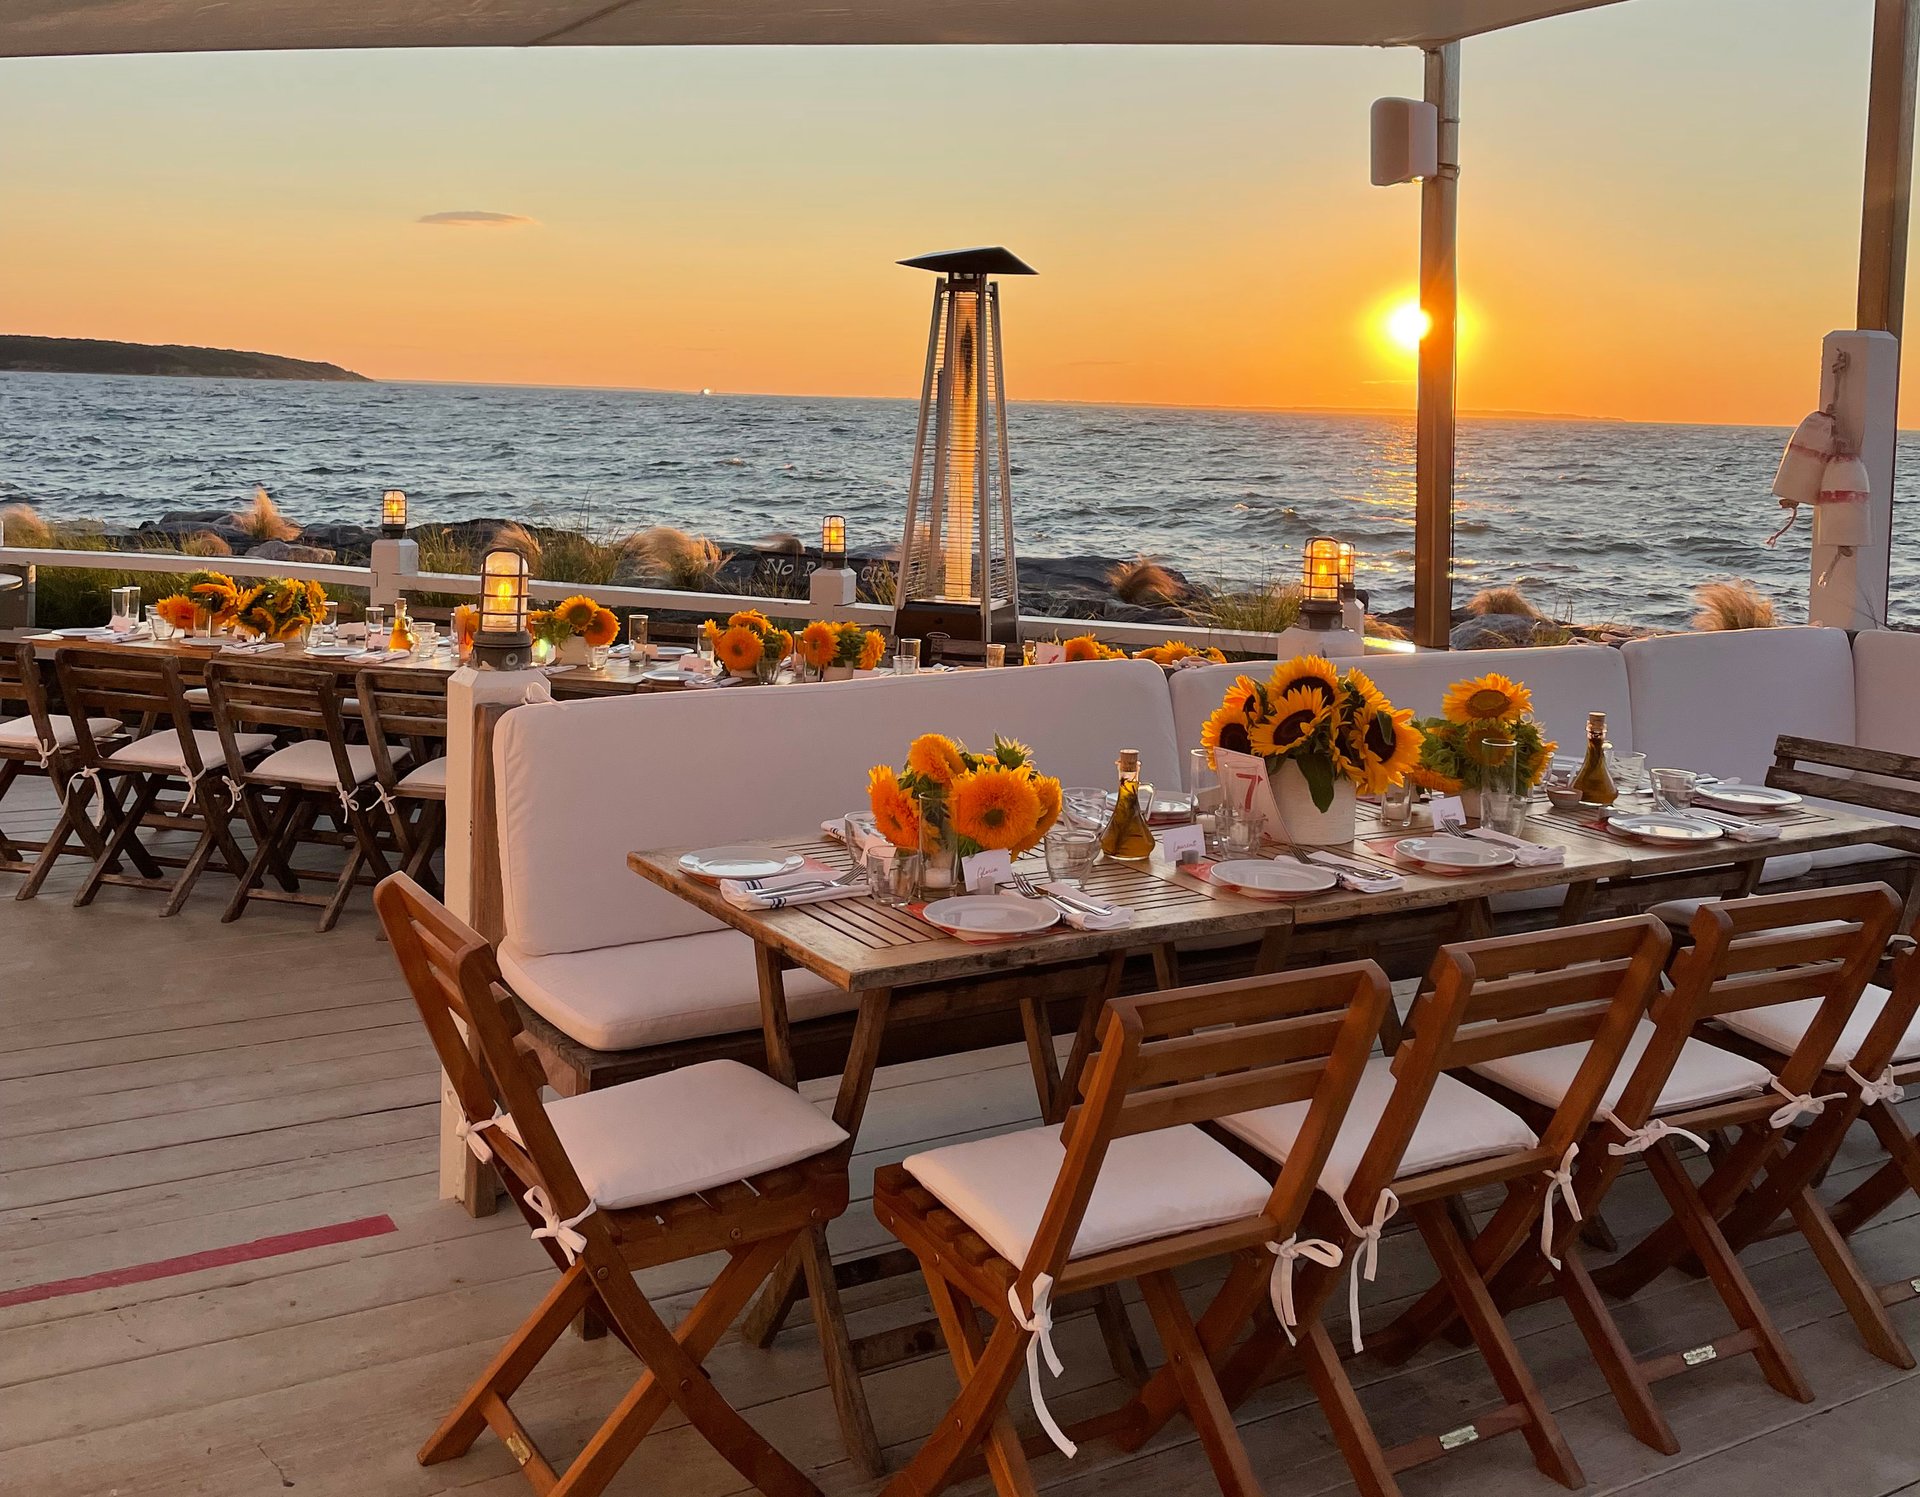 A private event hosted at Duryea's Montauk picturing a table set up with sunflowers